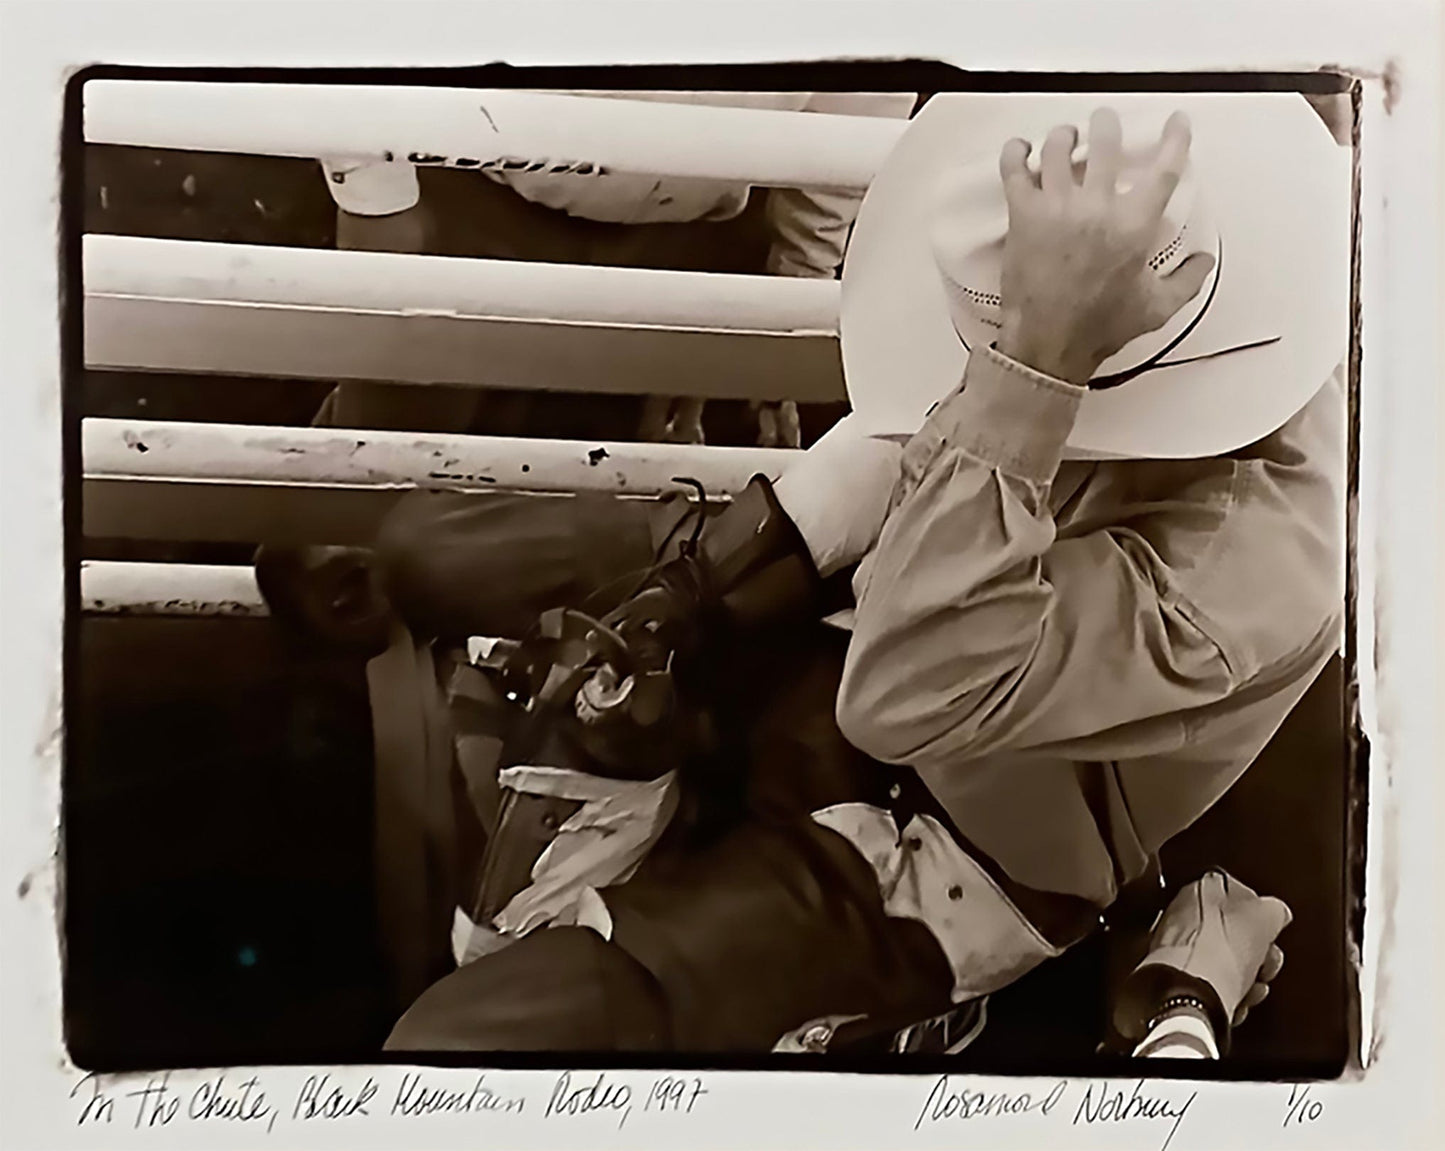 Rosamond Norbury photo In the Chute, Blk Mtn Rodeo 1/10, framed Art Works Gallery